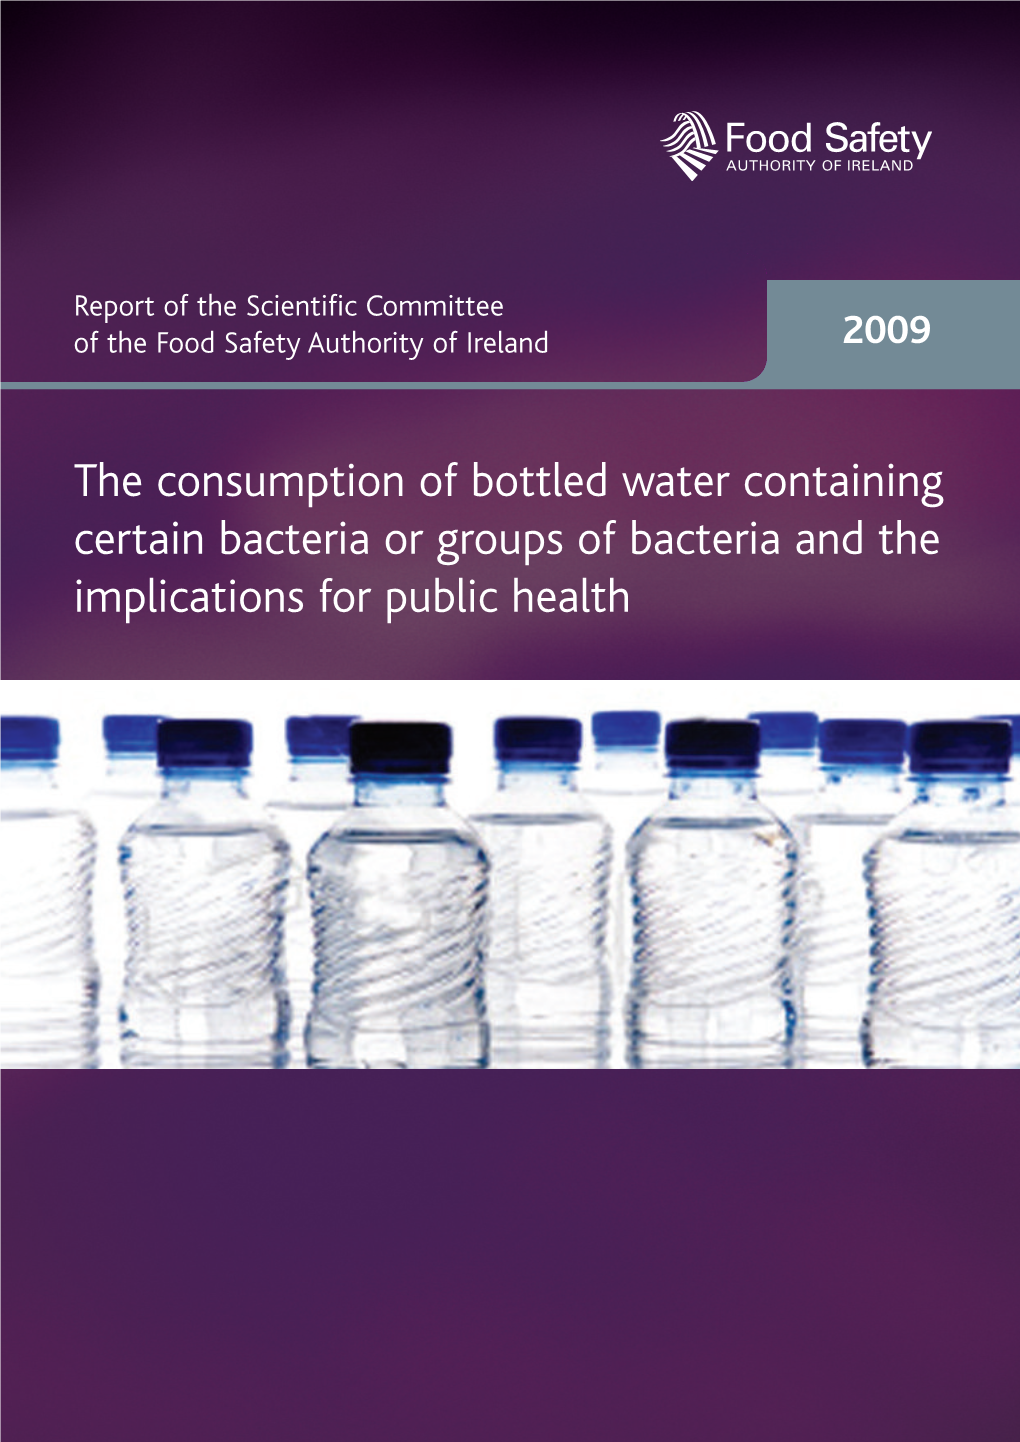 The Consumption of Bottled Water